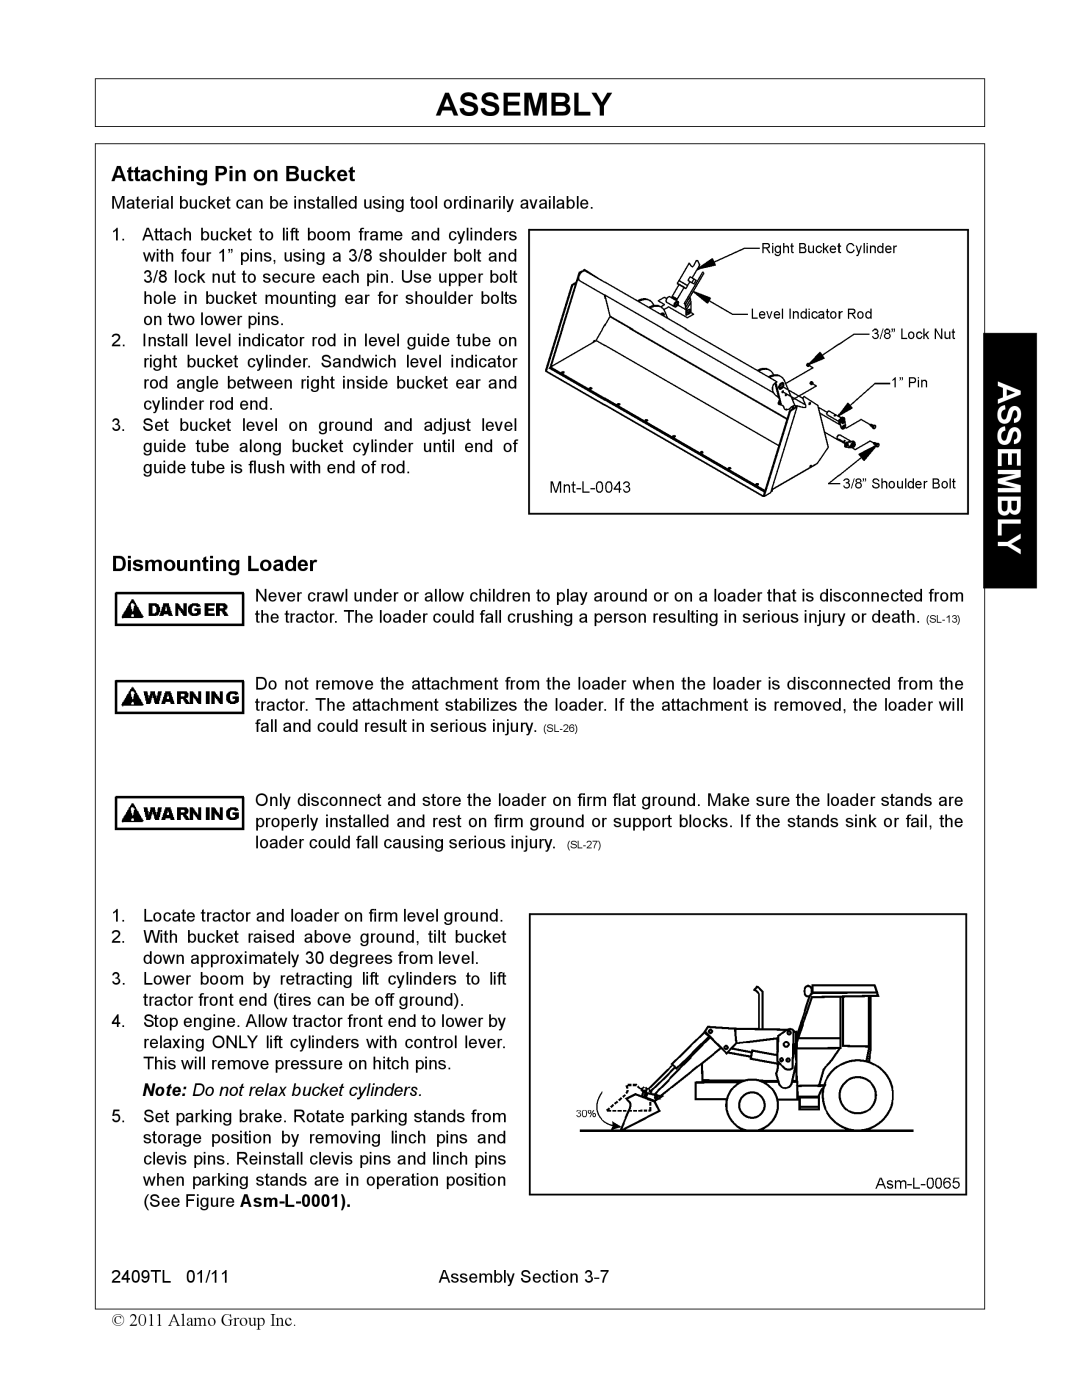 Servis-Rhino 2409TL manual Attaching Pin on Bucket, Dismounting Loader 